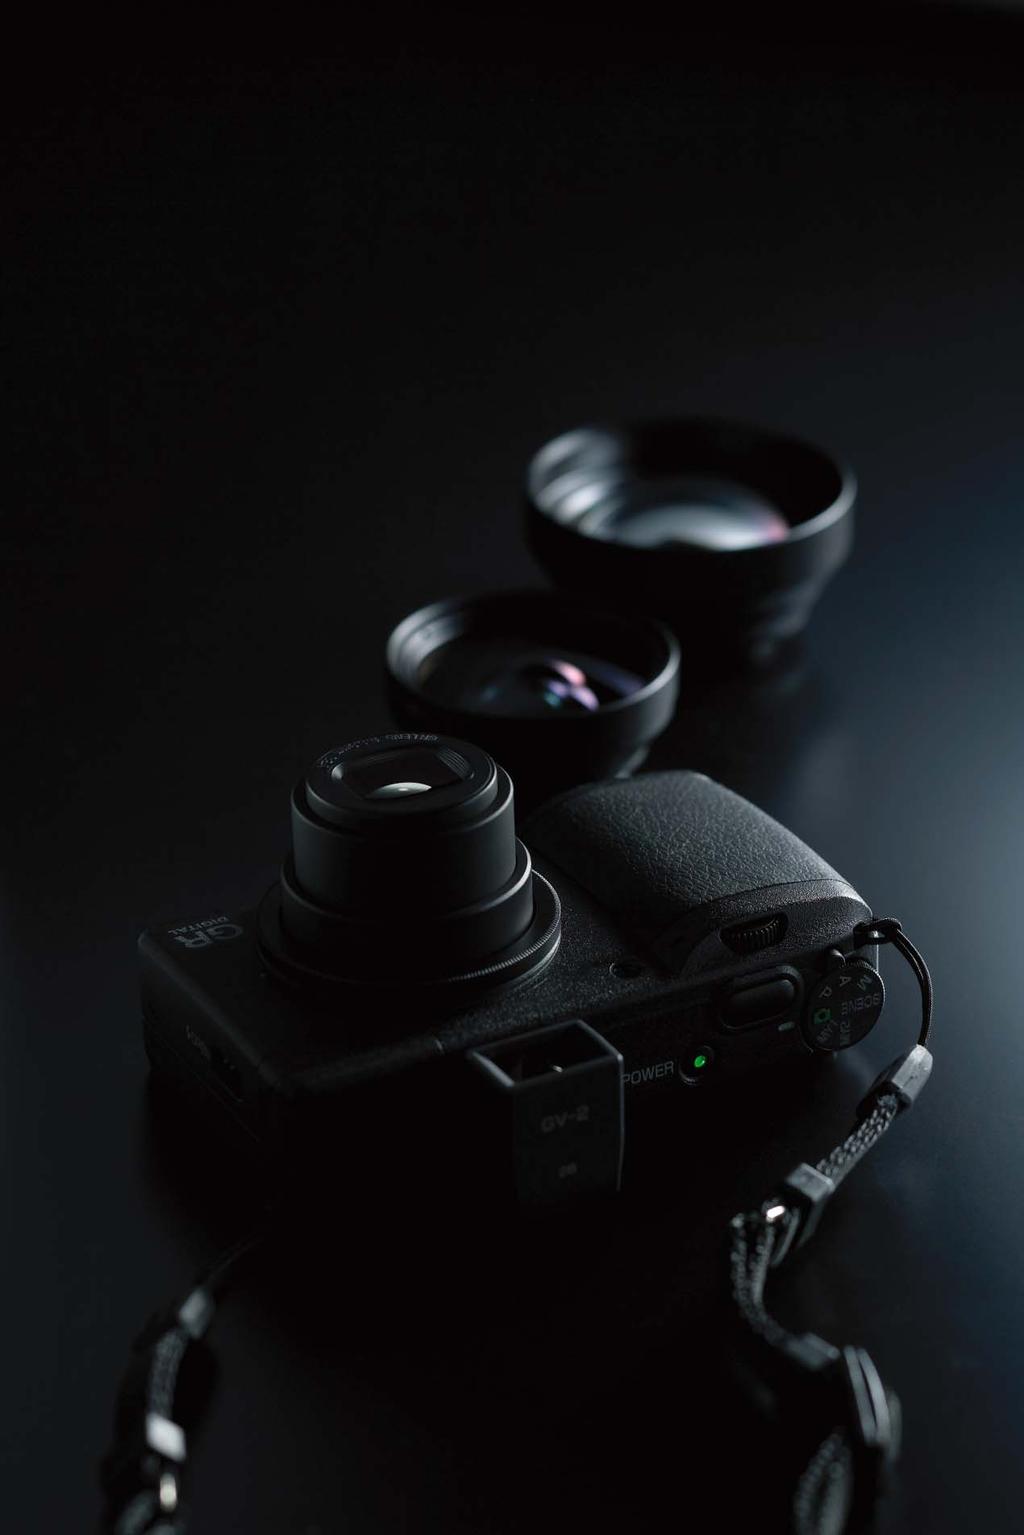 Successor to the original concept, and its maturation as an instrument A camera that delivers the intended results. A camera that s advanced yet simple to operate, reliable and precision built.